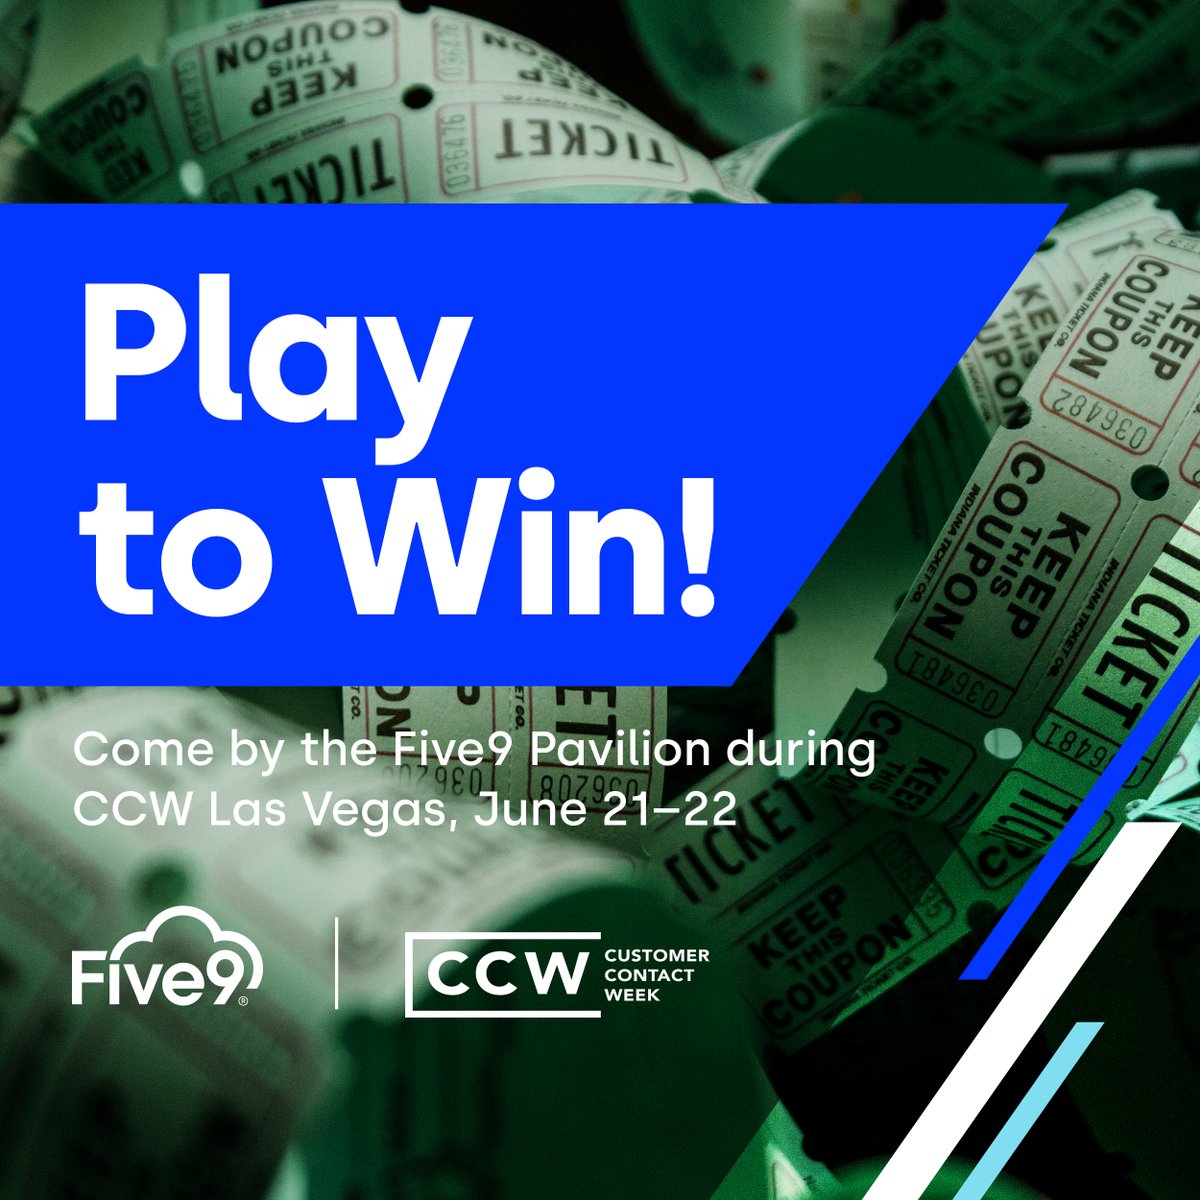 Fabulous prizes await in the @Five9 Partner Passport to Prizes at #CCWVegas! Thanks to our partners: @balto_ai @birch_ai @Calabrio @CallMiner @cresta 
@InflowComm @MeeraDotAI @MiaRecInc  @pindrop @ServiceNow @XSELL_TECH #PartnerPowered
@Staceyecolesd #Five9Joy @Chelsea_Five9